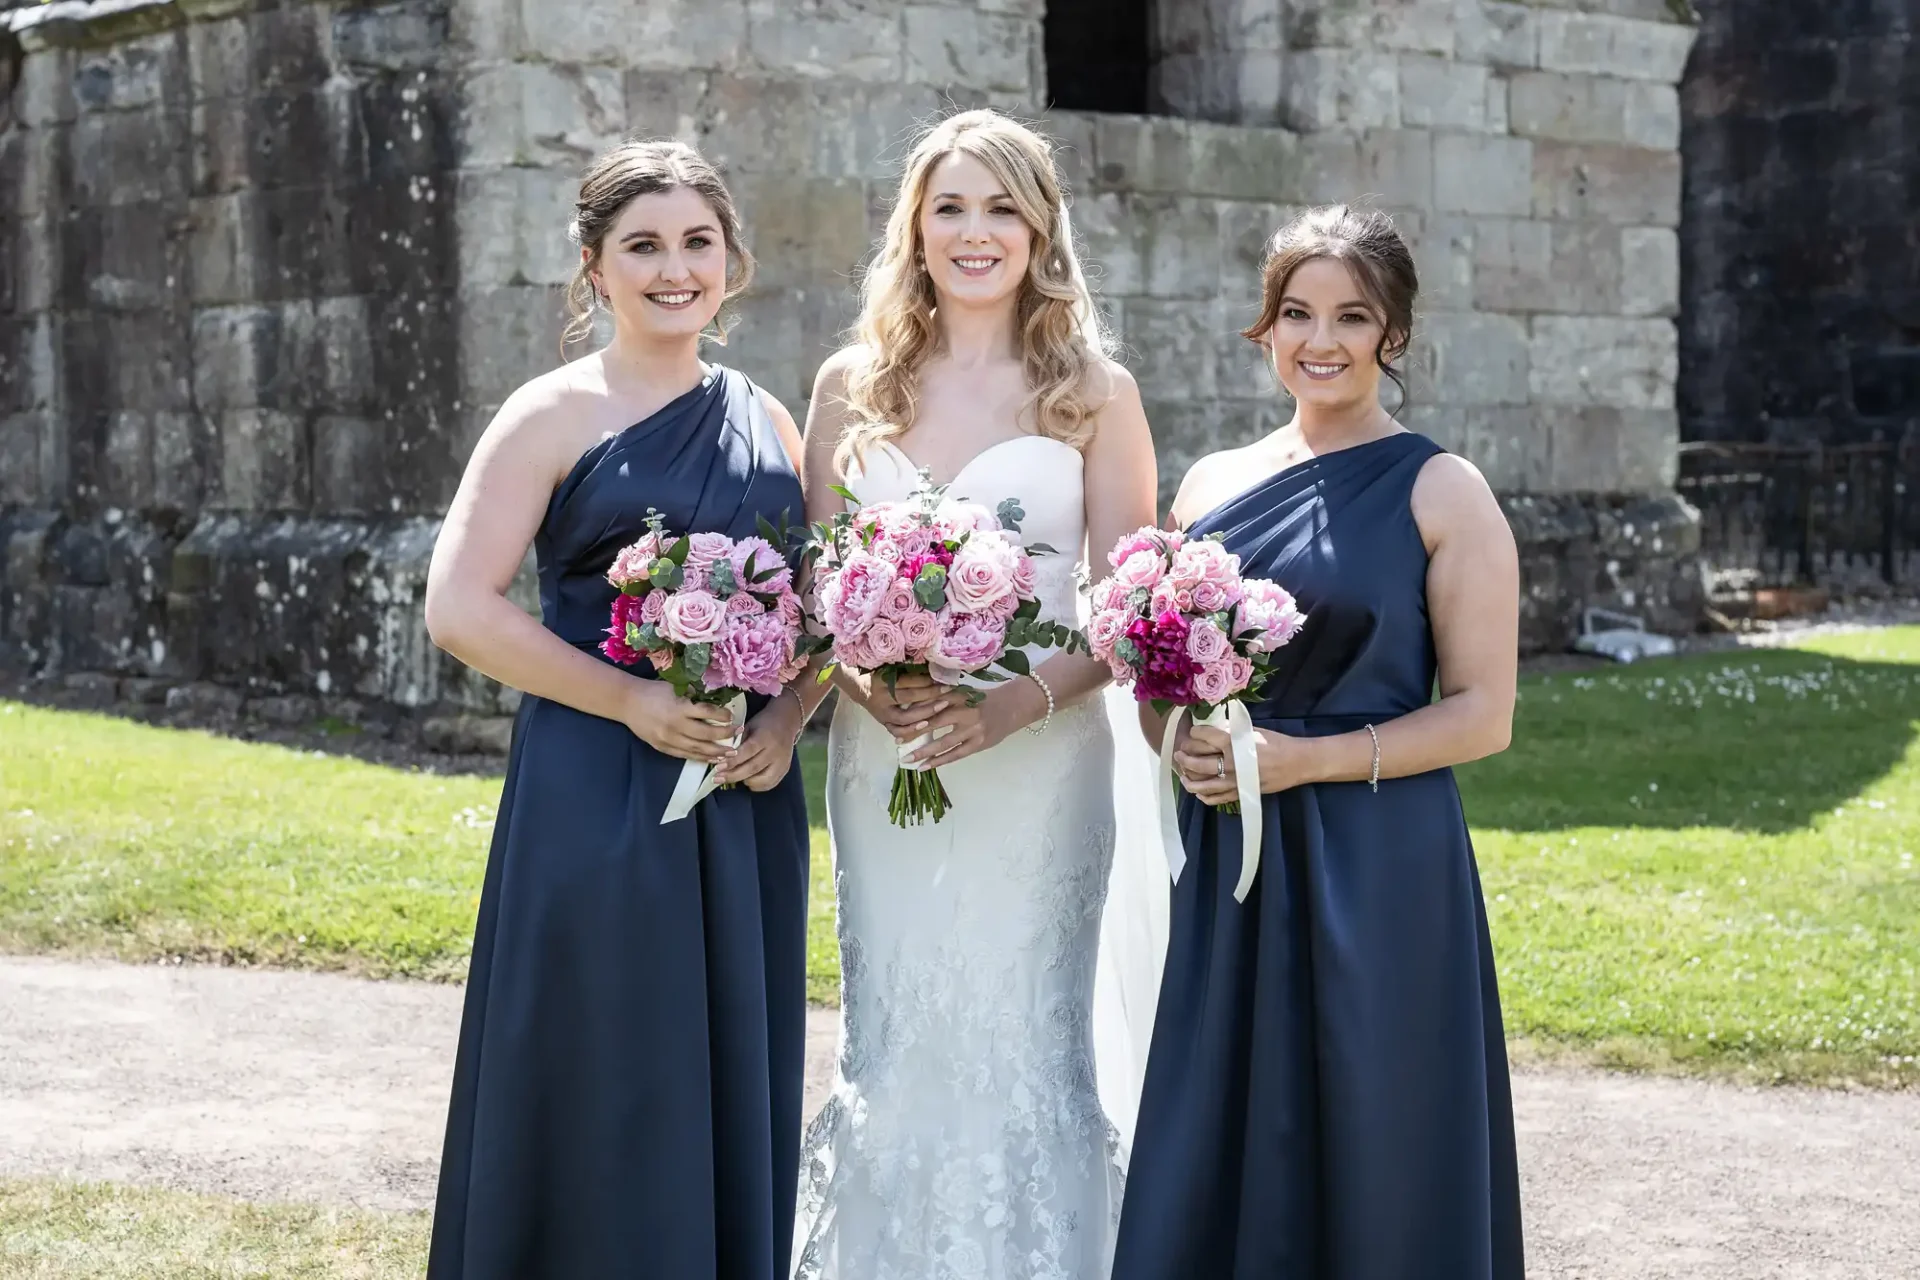 A bride in a white dress stands with two bridesmaids in navy blue dresses, all holding bouquets, in front of a stone building.